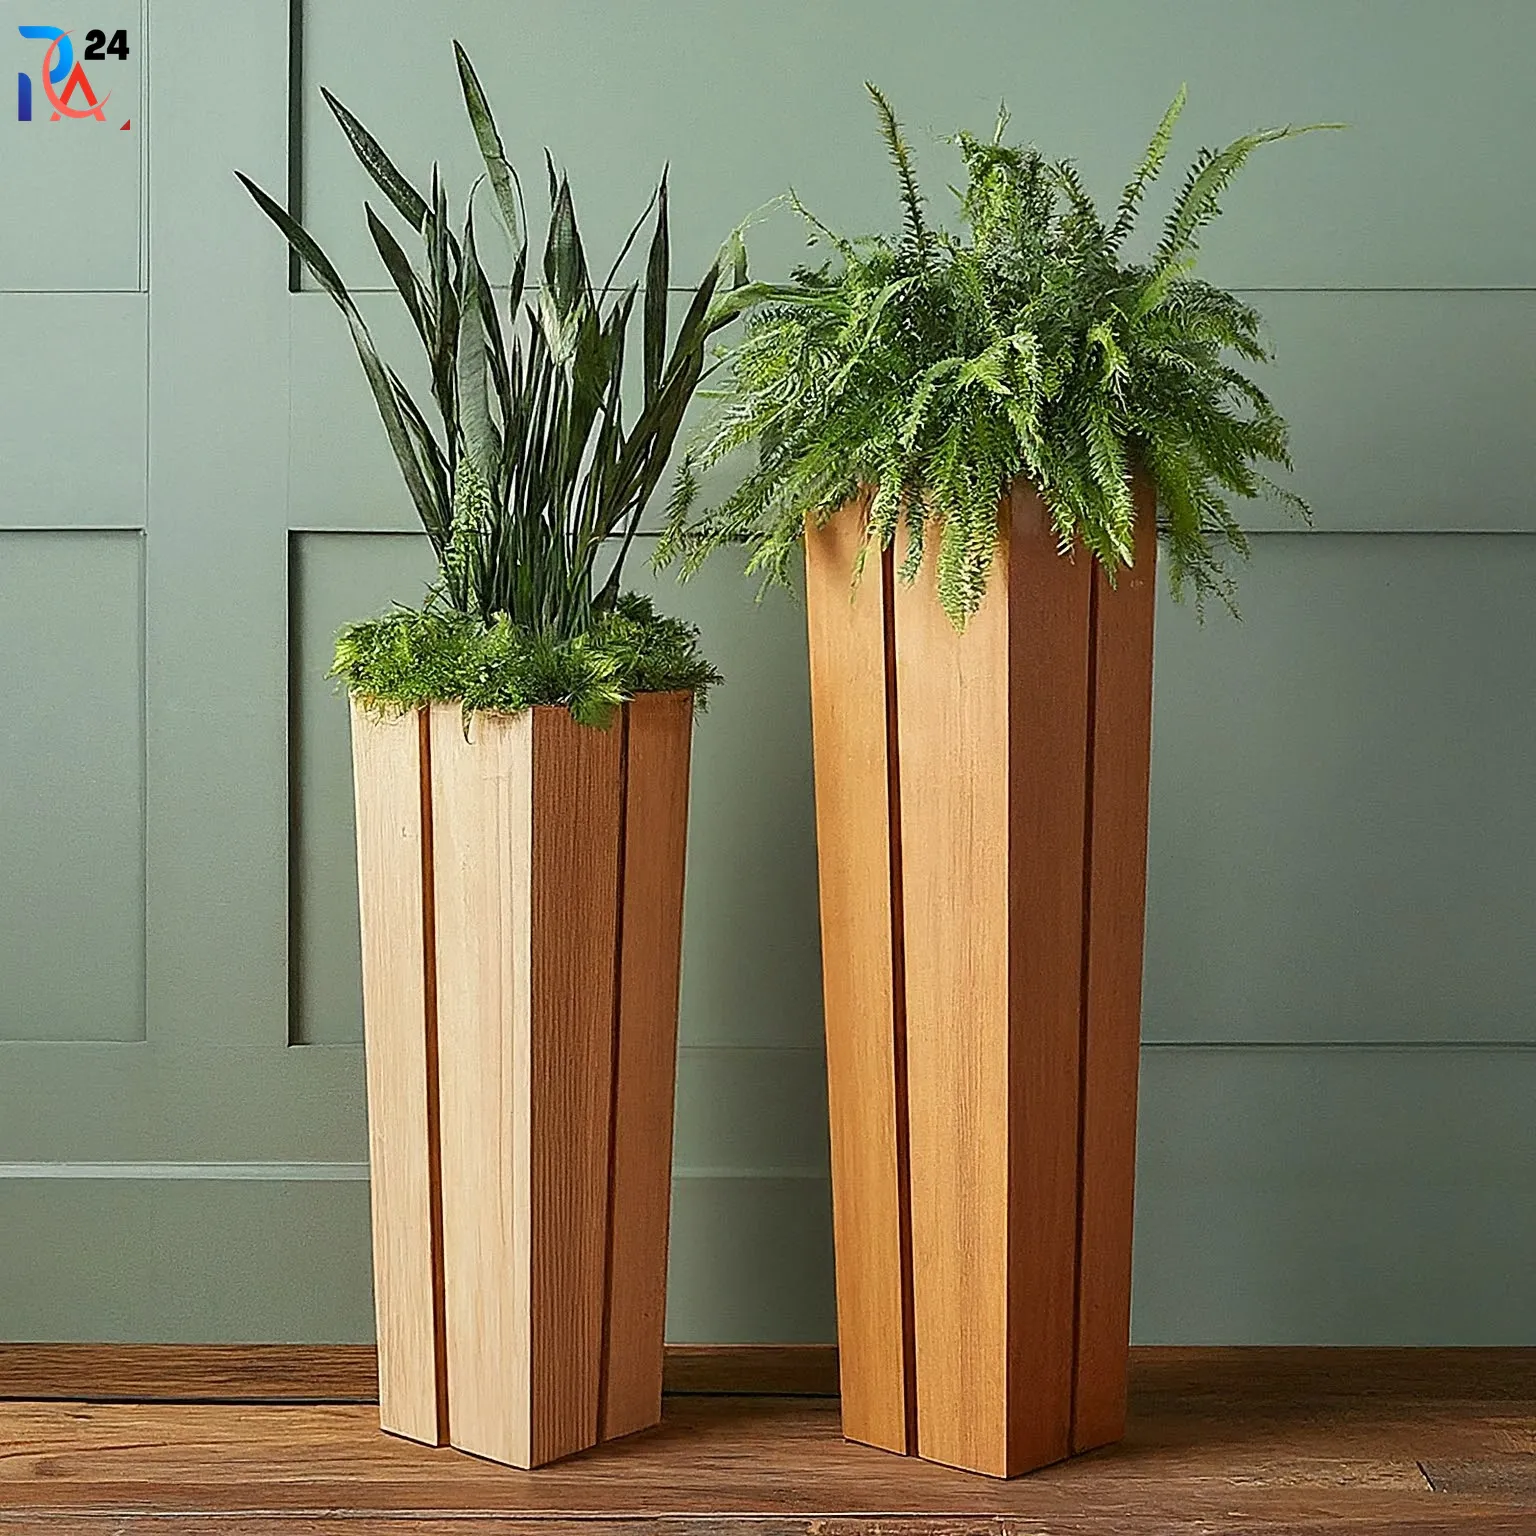 Tall and Narrow Planters (27)